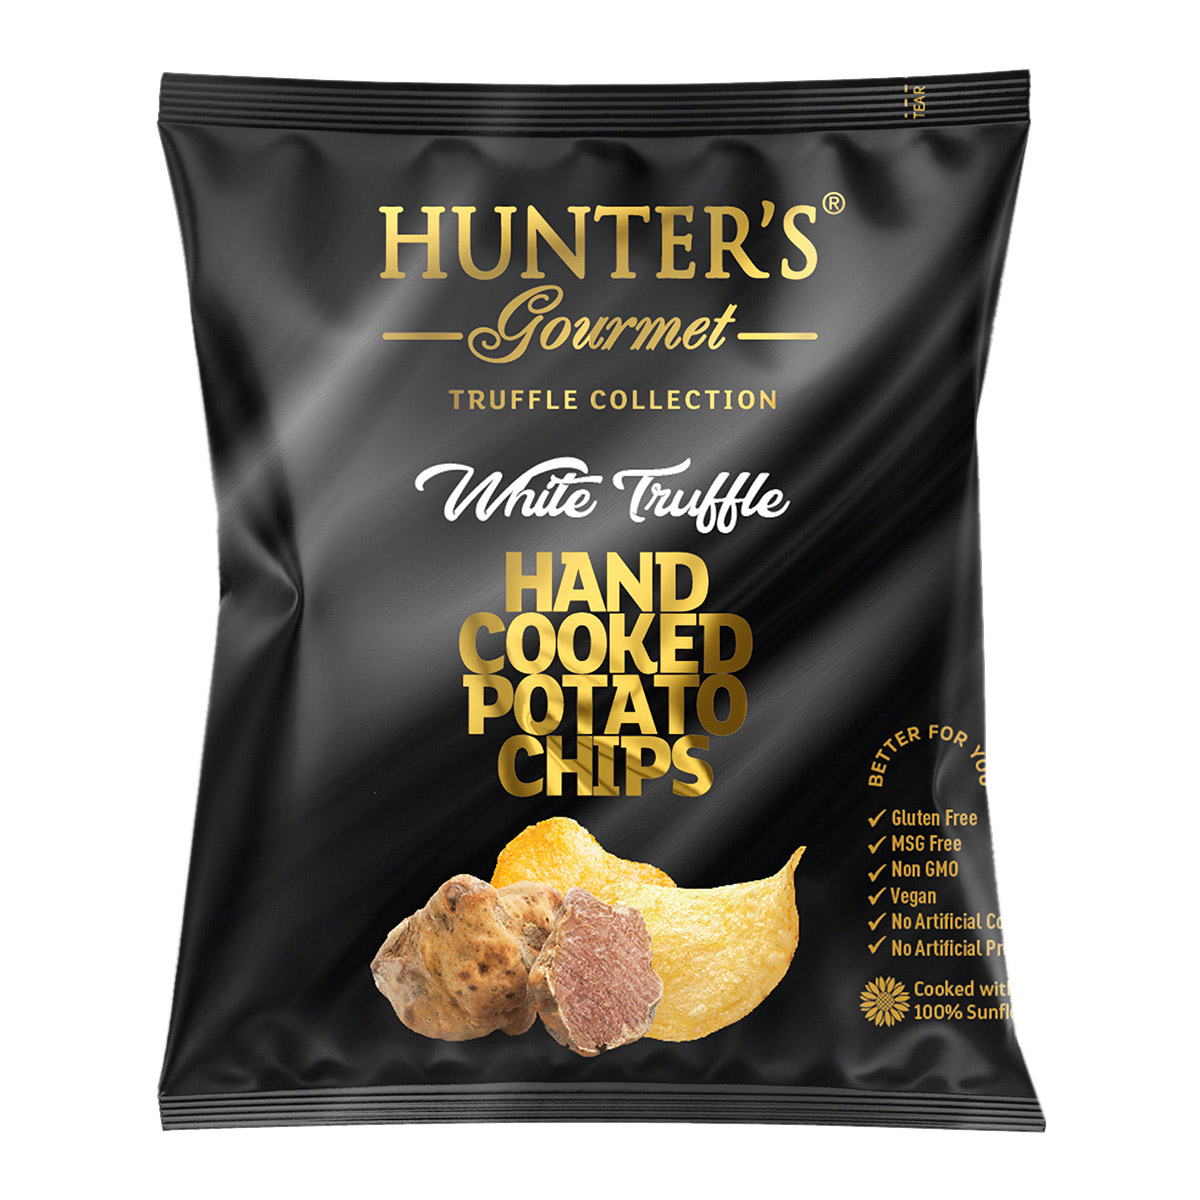 Hunter’s Gourmet Hand Cooked Potato Chips – White Truffle and Porcini – Truffle Collection (25gm)